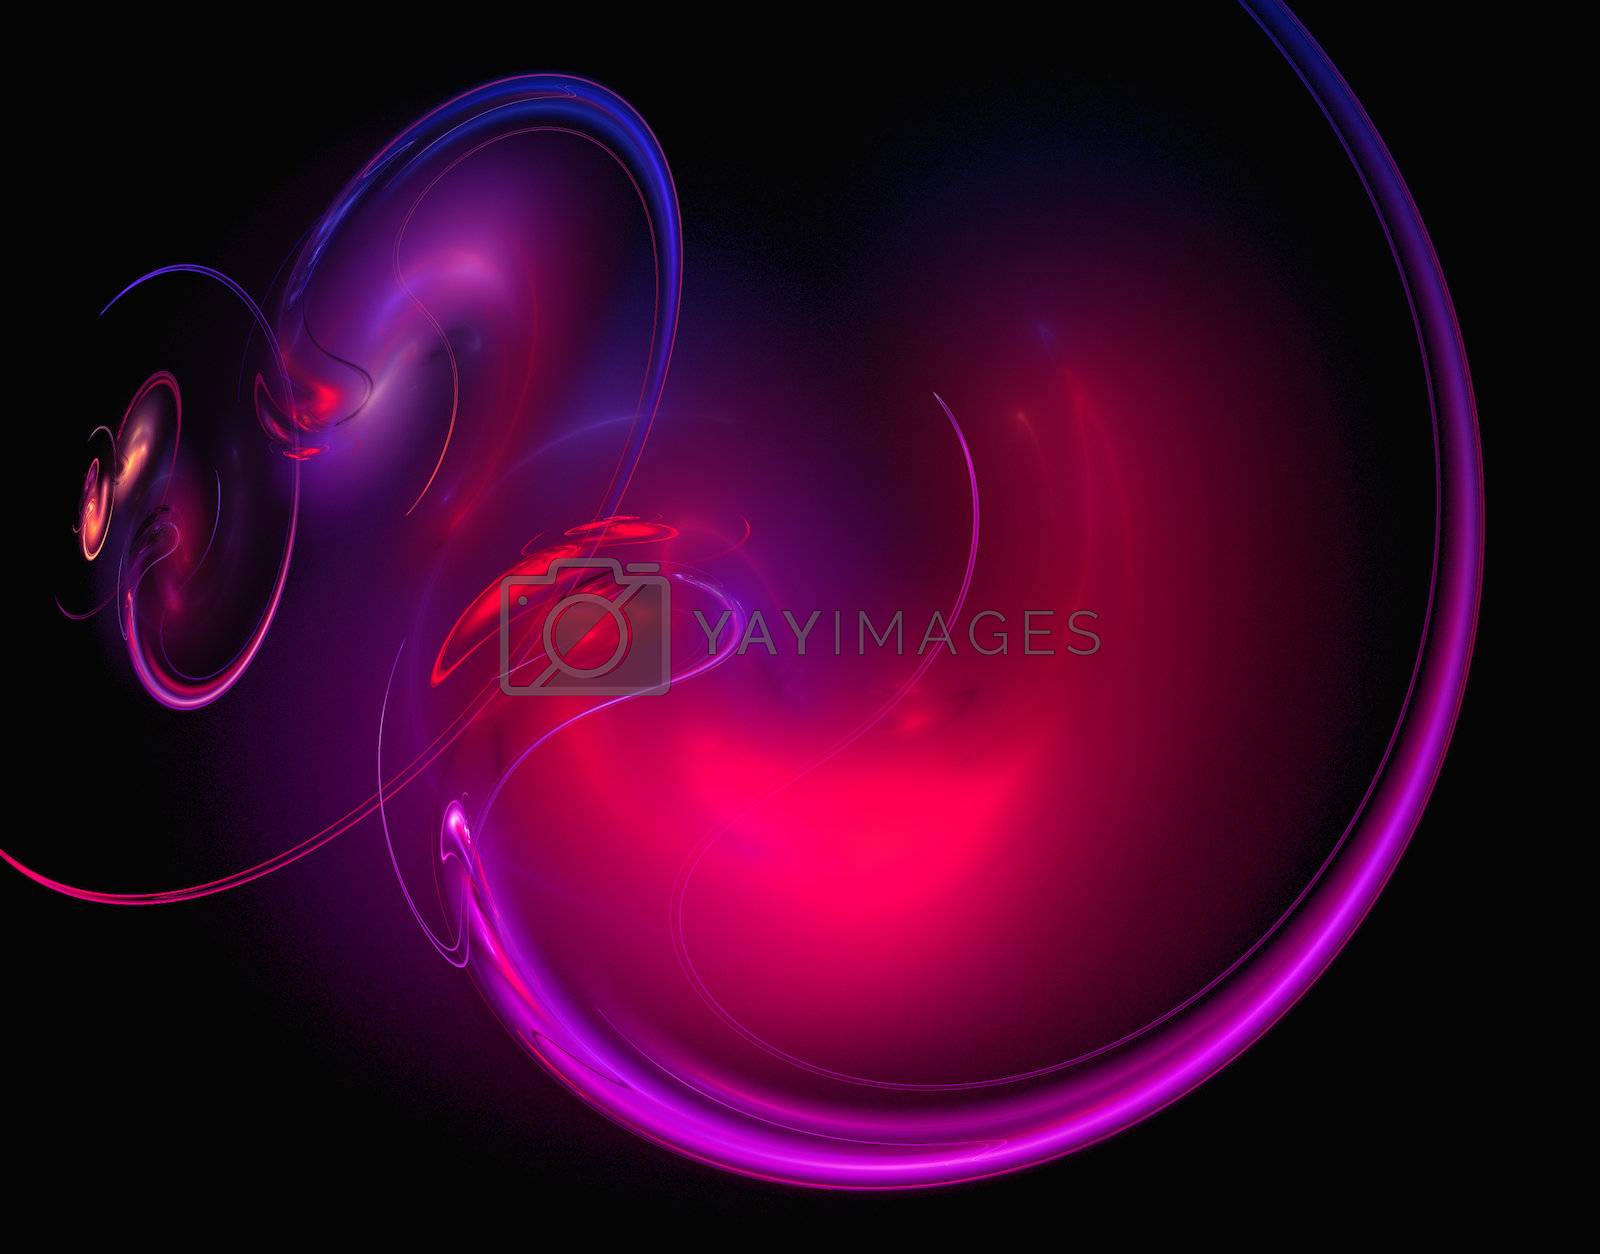 Royalty free image of red and purple background by jbouzou